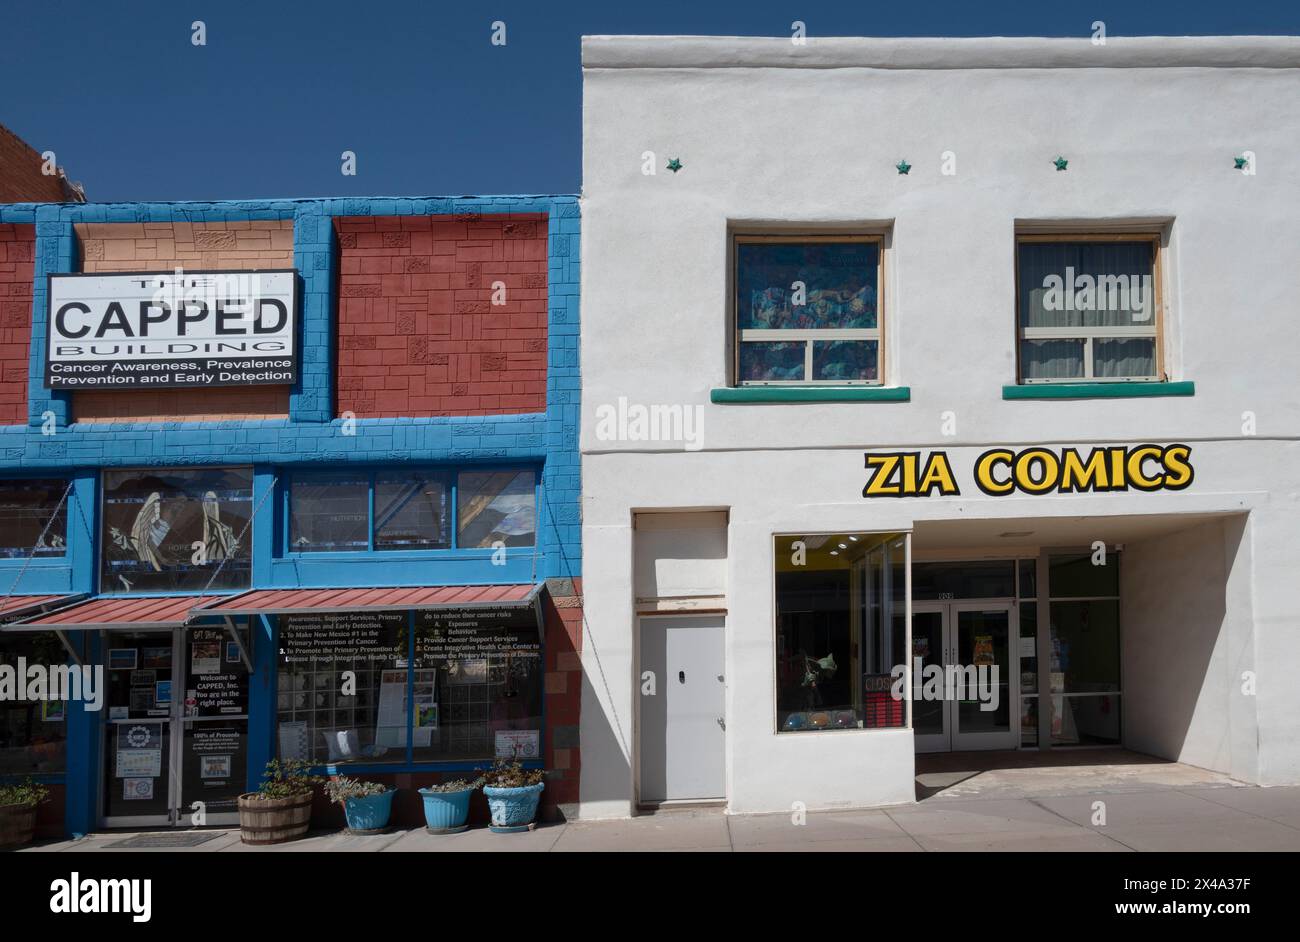 The entrance to the CAPPED nonprofit organization offering health services, alongside the Zia Comics storefront in downtown Alamogordo, NM Stock Photo